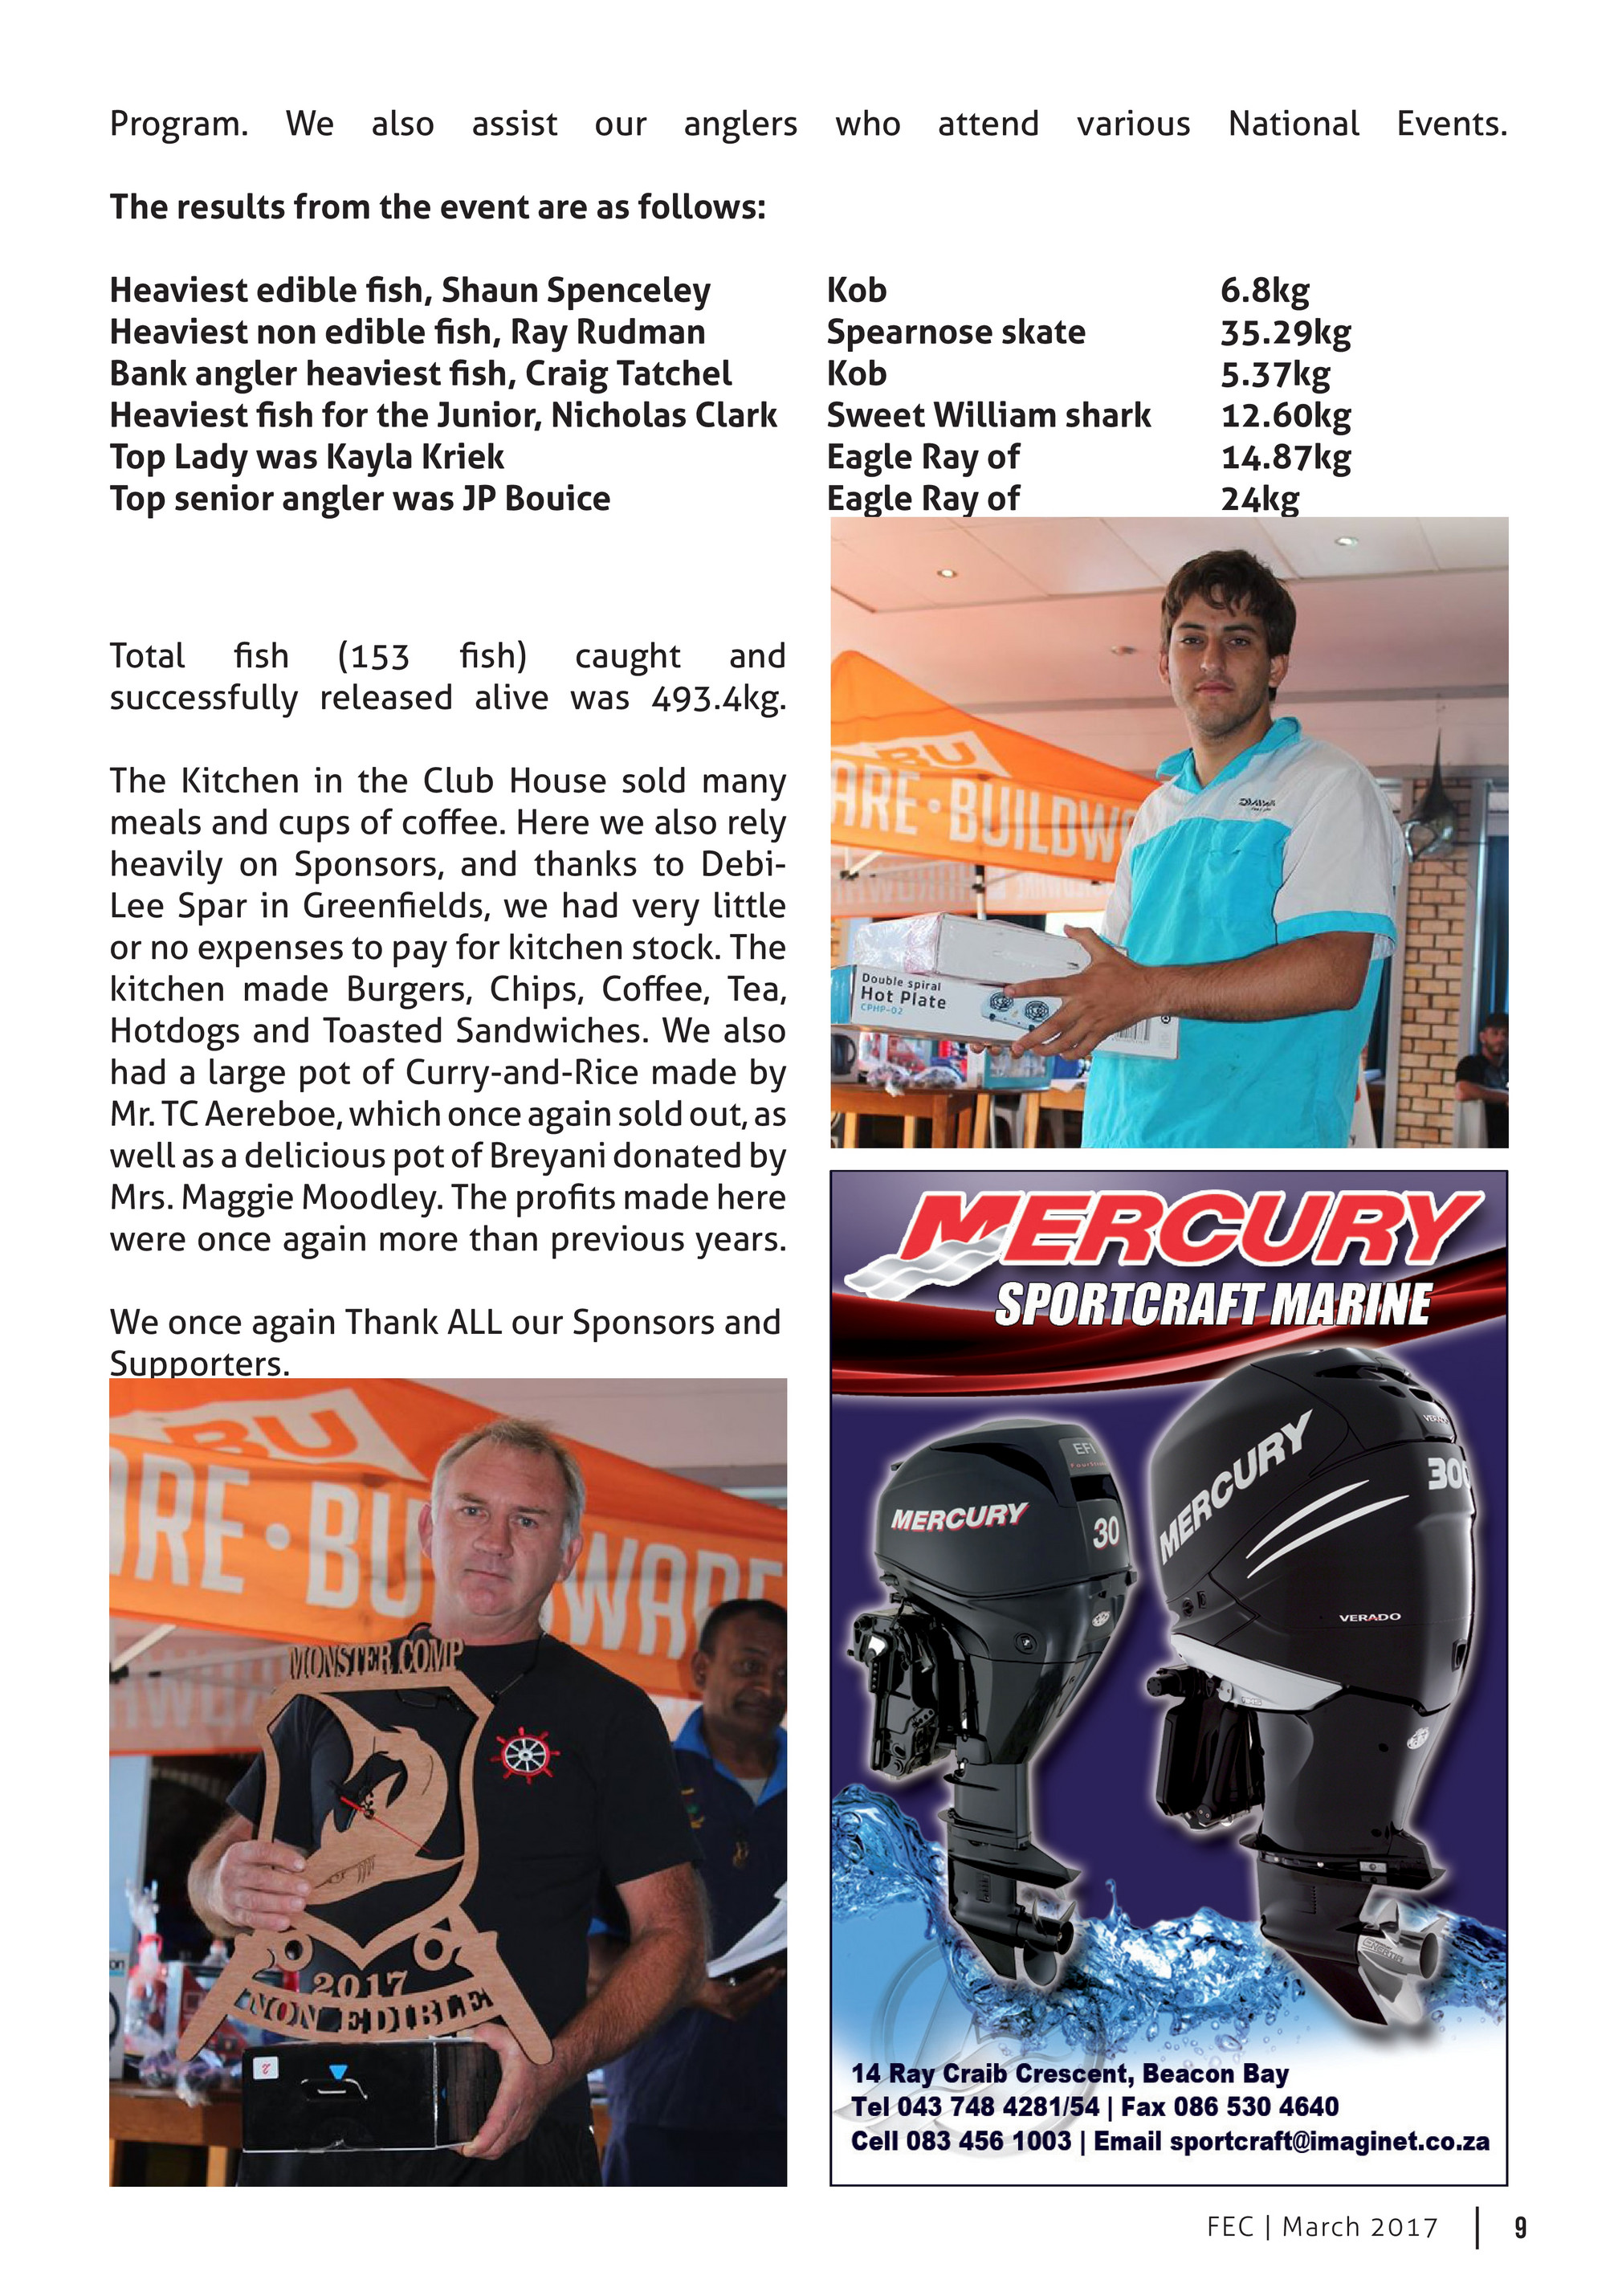 Fishing EC - Fishing EC Magazine - May 2017 - Page 20-21 - Created with  Publitas.com